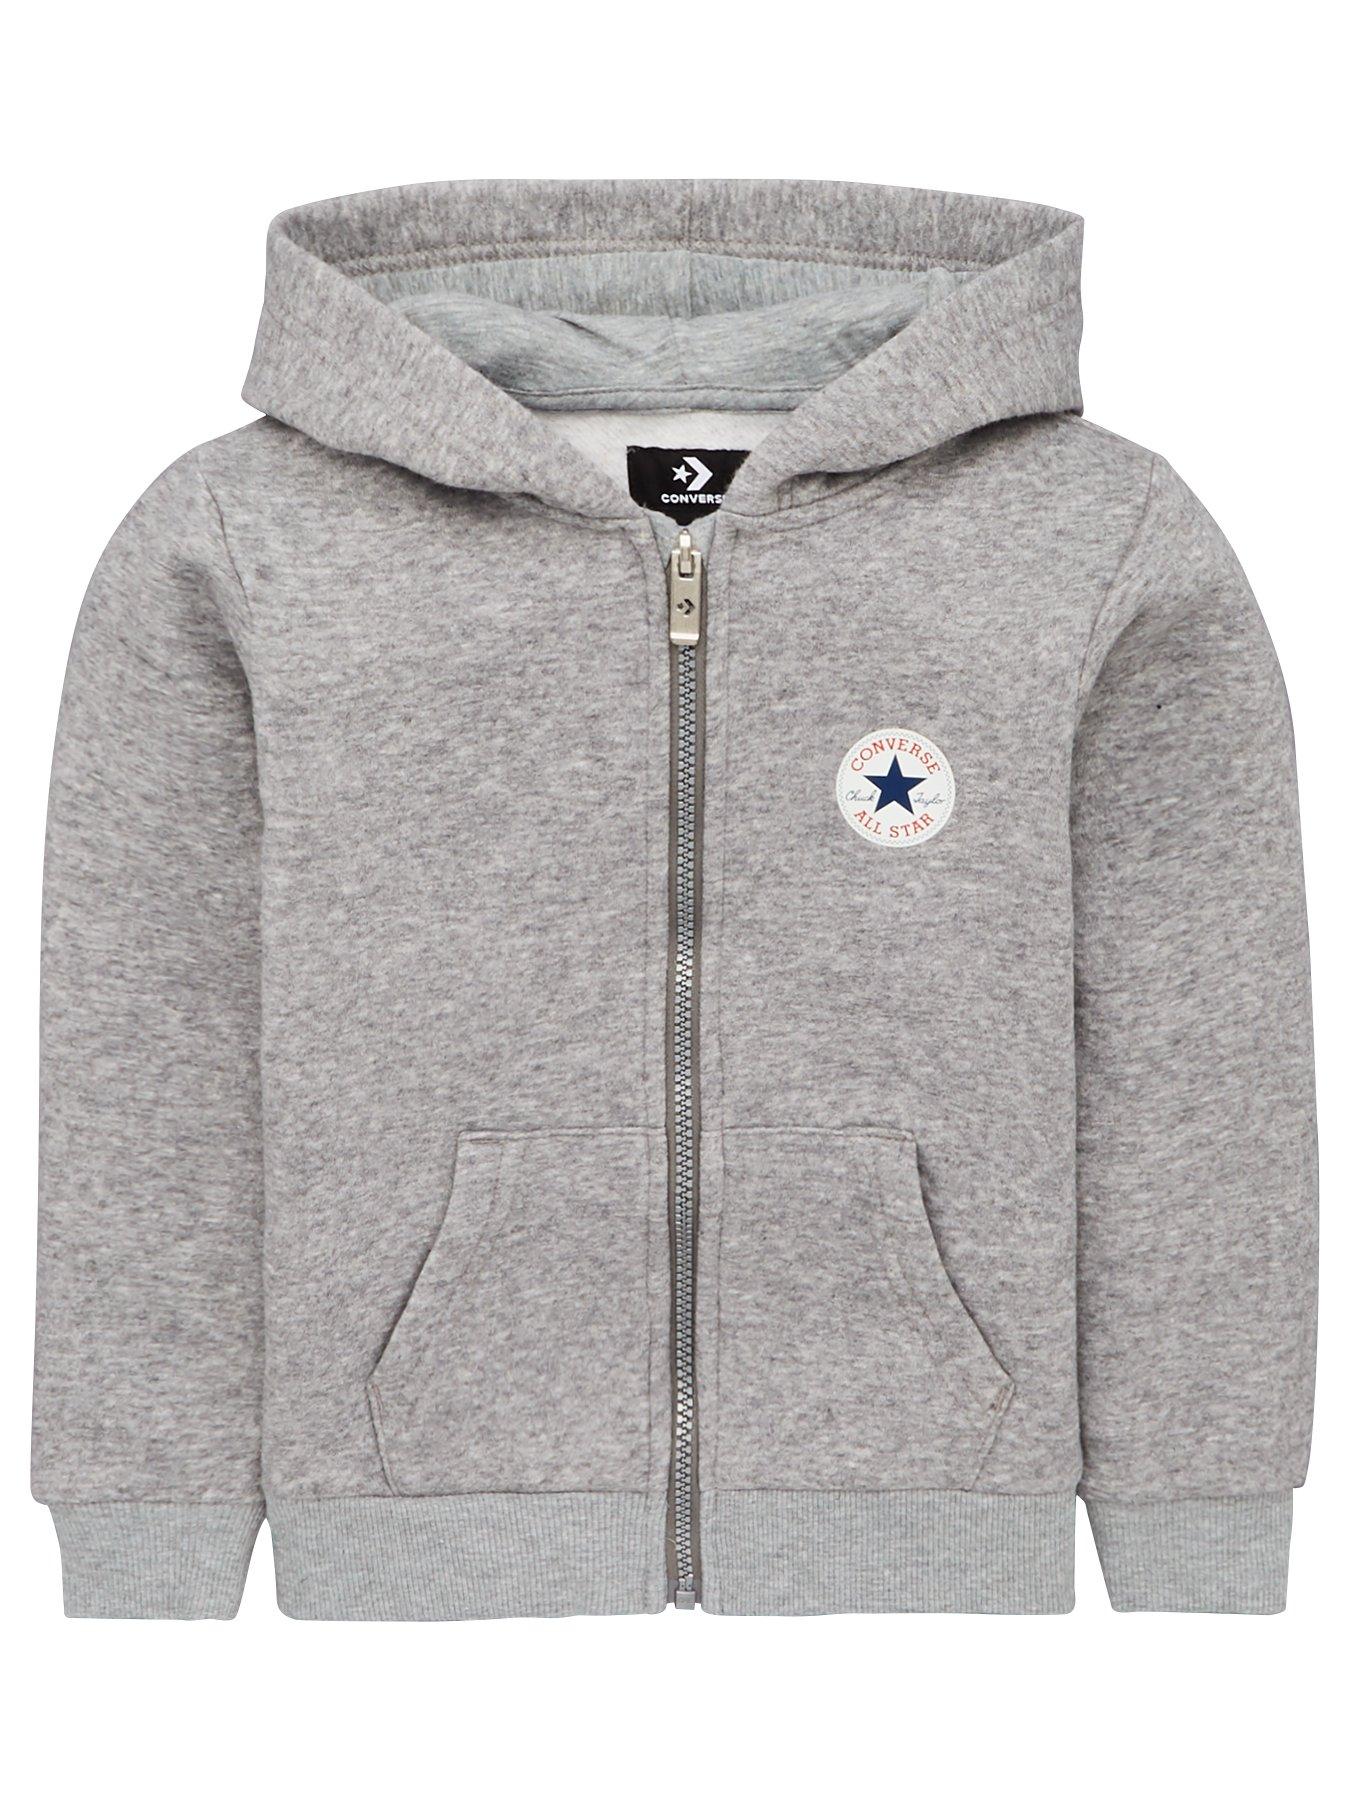 childrens converse tracksuits uk